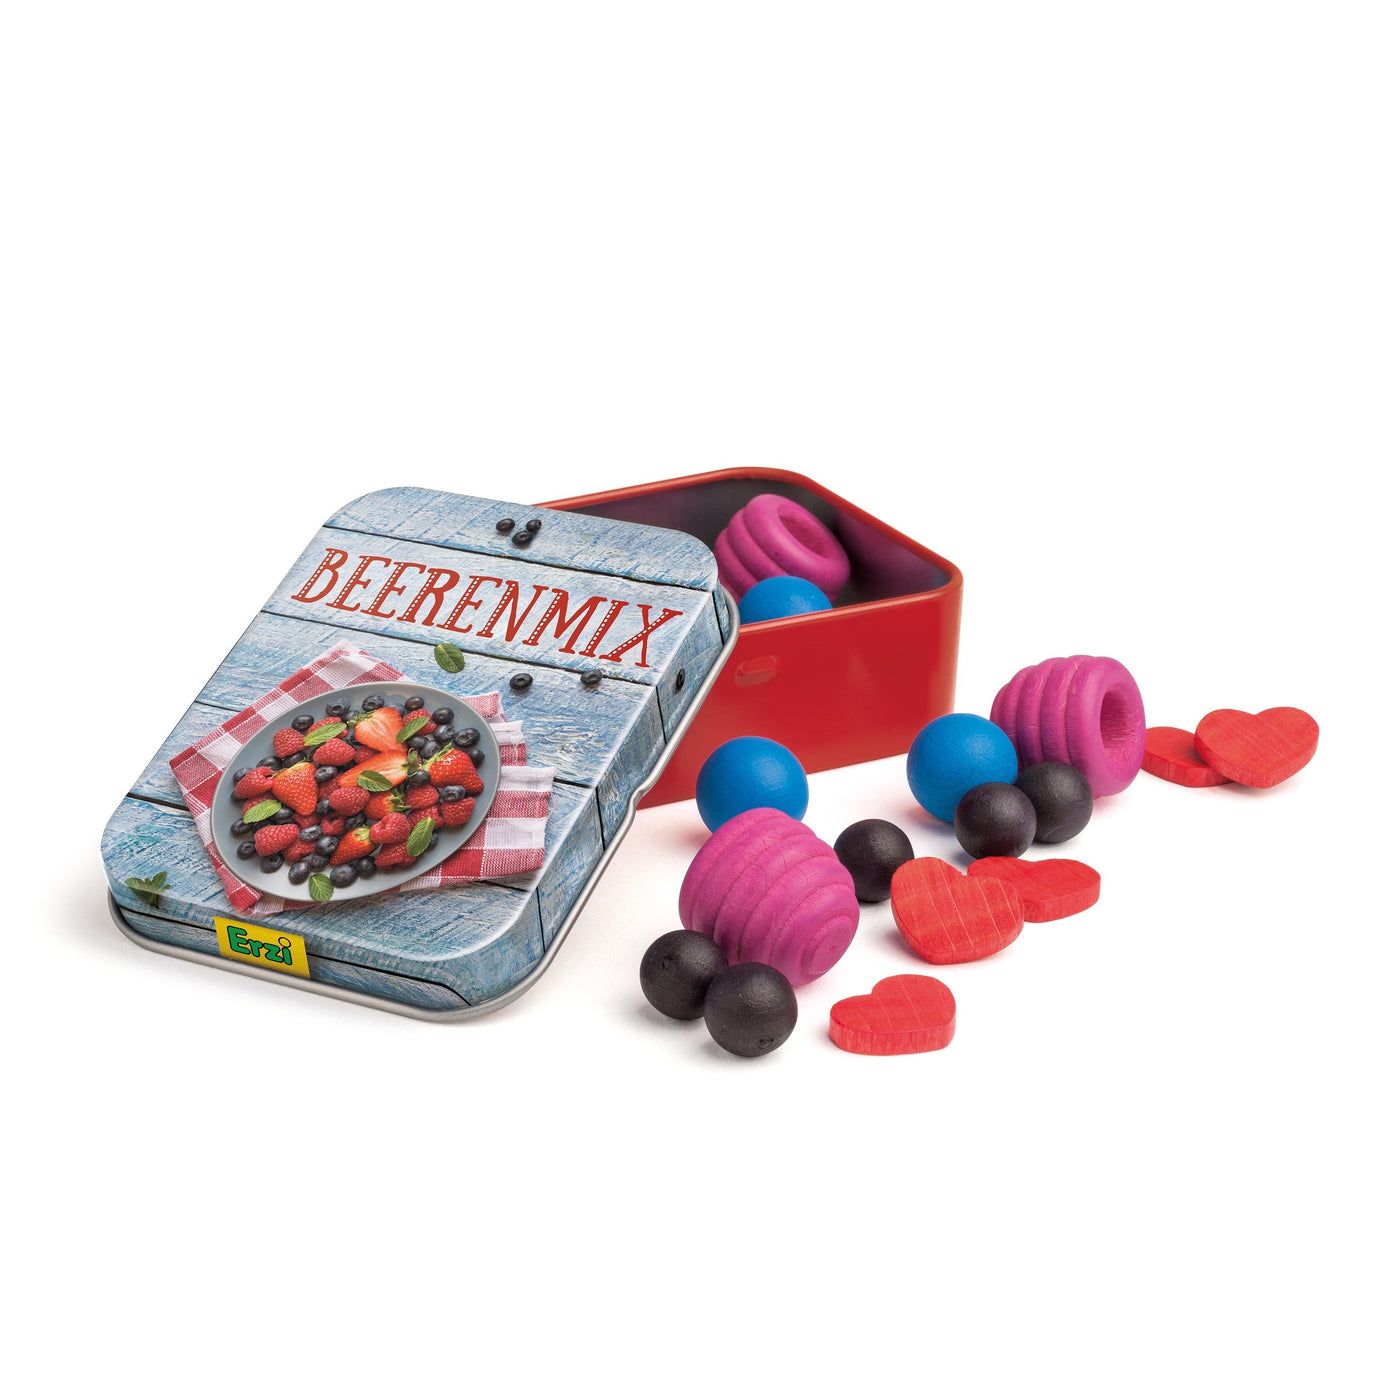 Erzi Mixed Berries in a Tin - Wooden Play Food